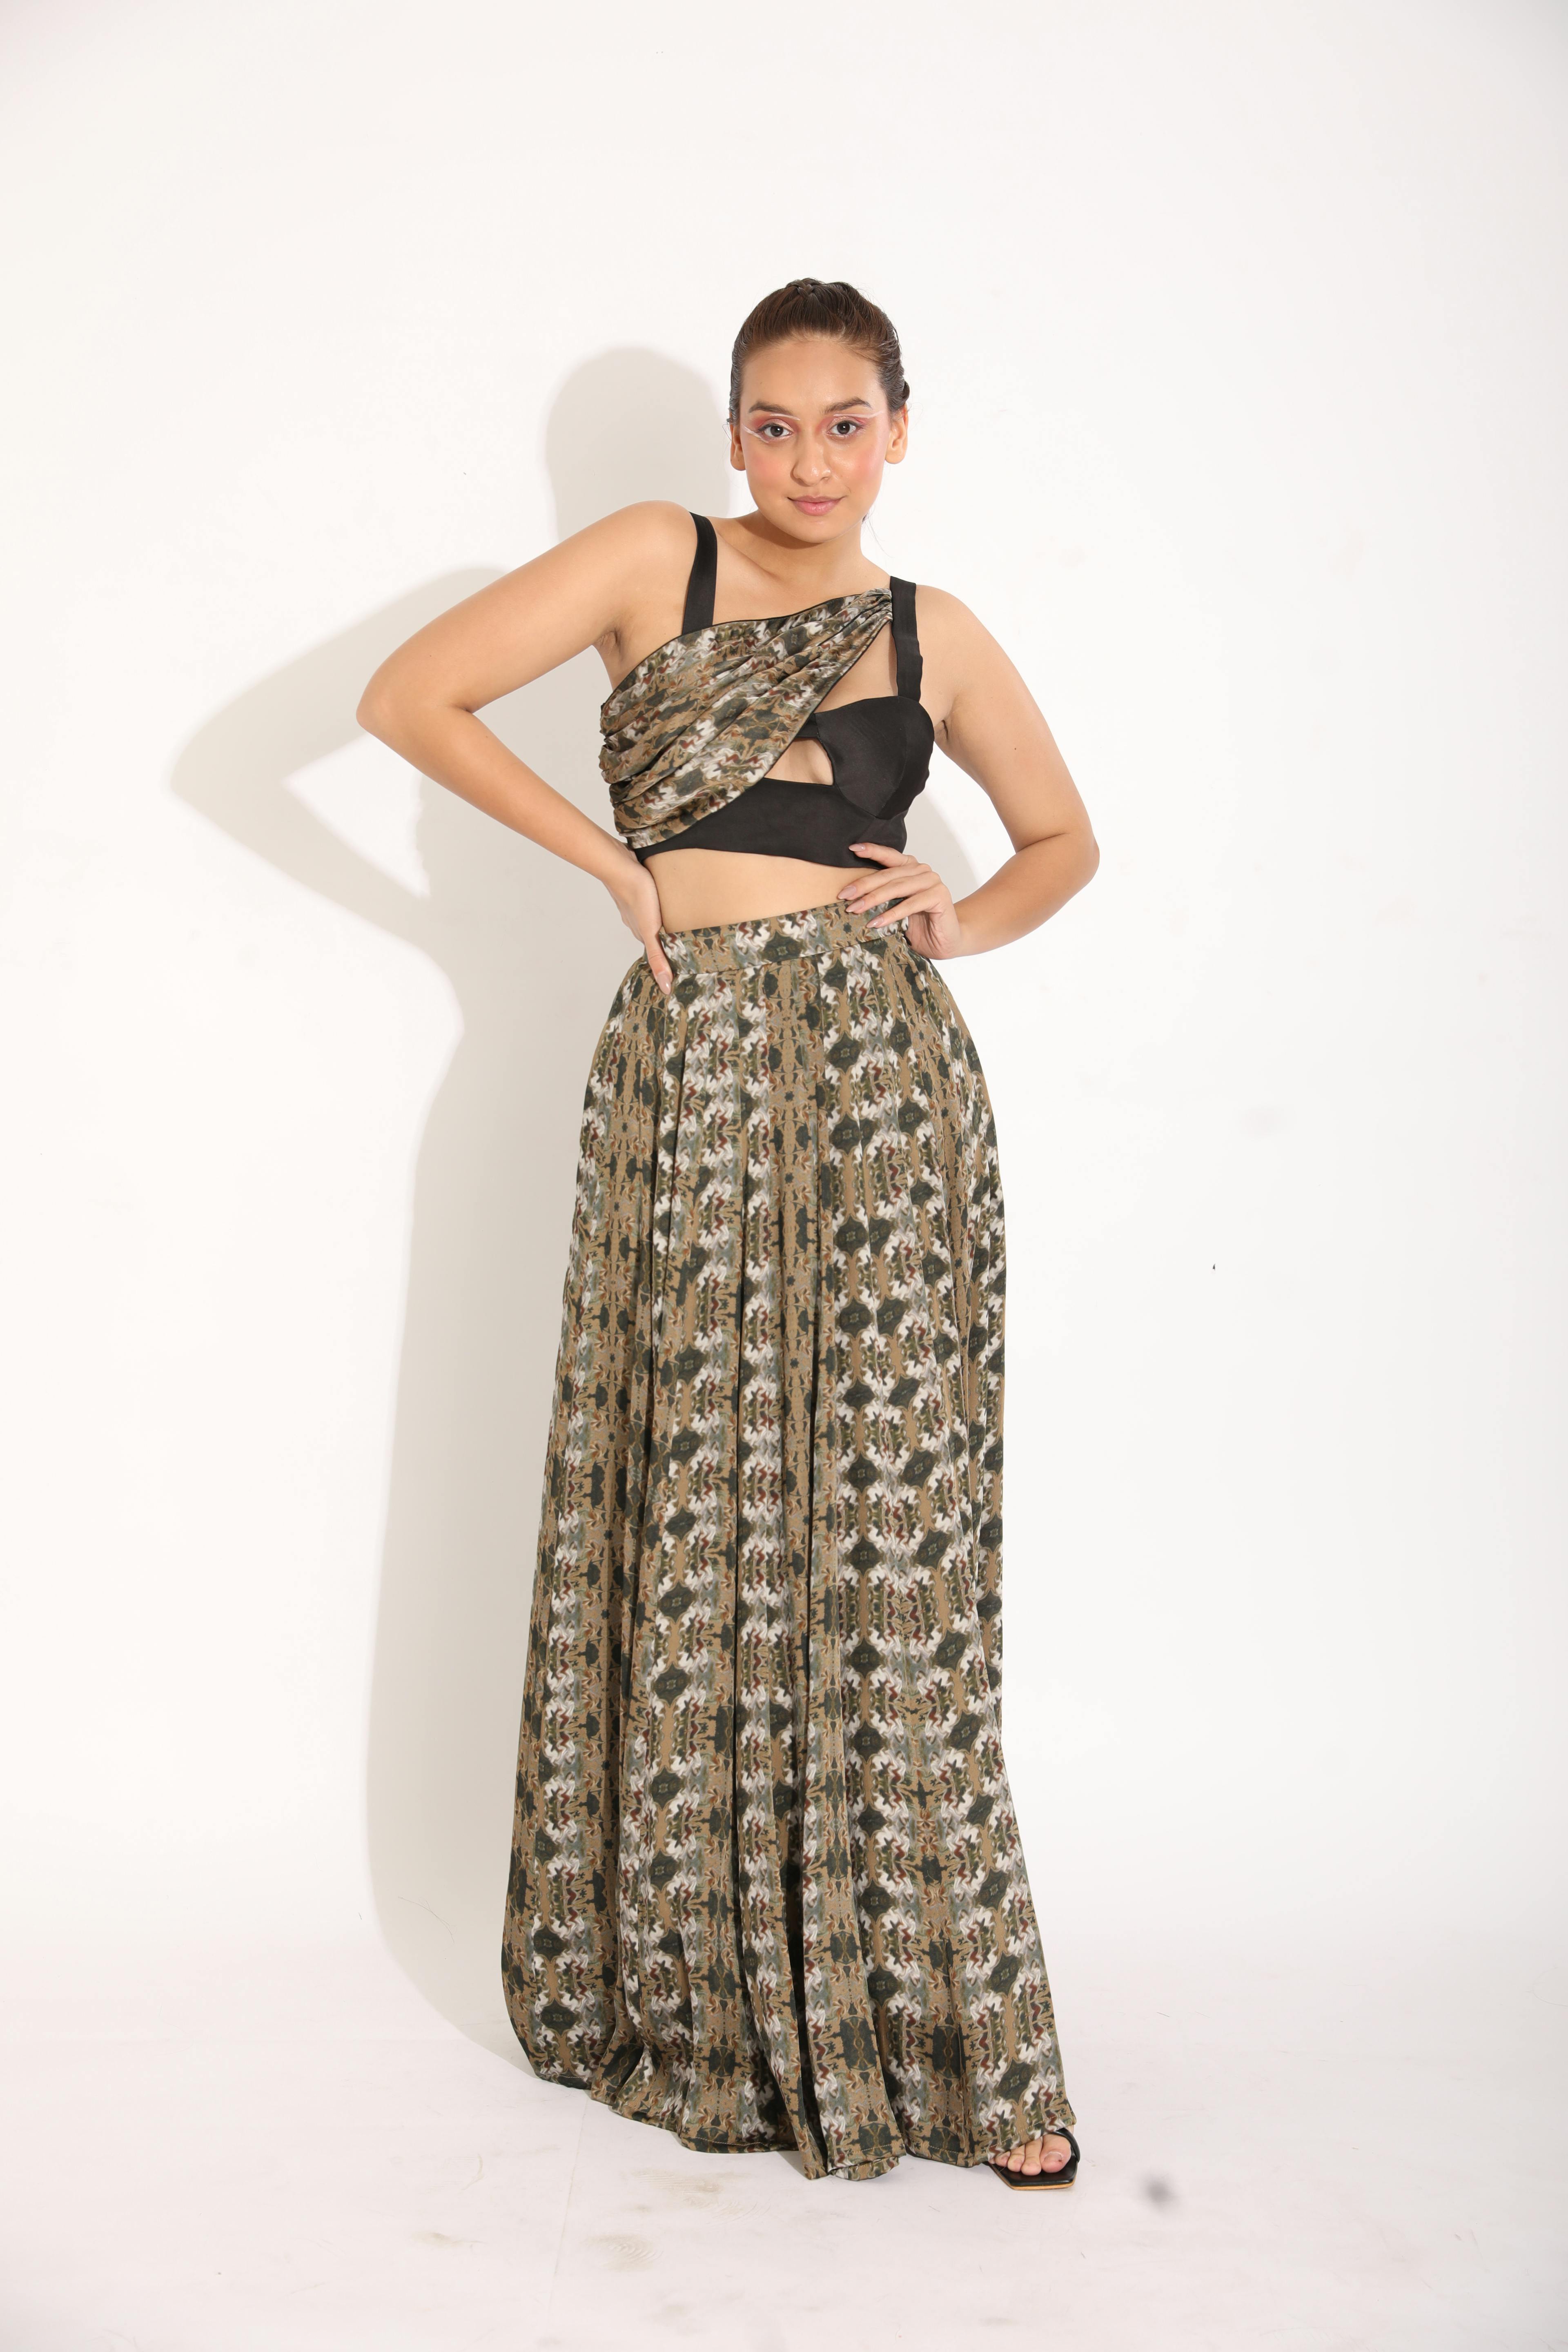 Bustier and Skirt , a product by Studio Surbhi